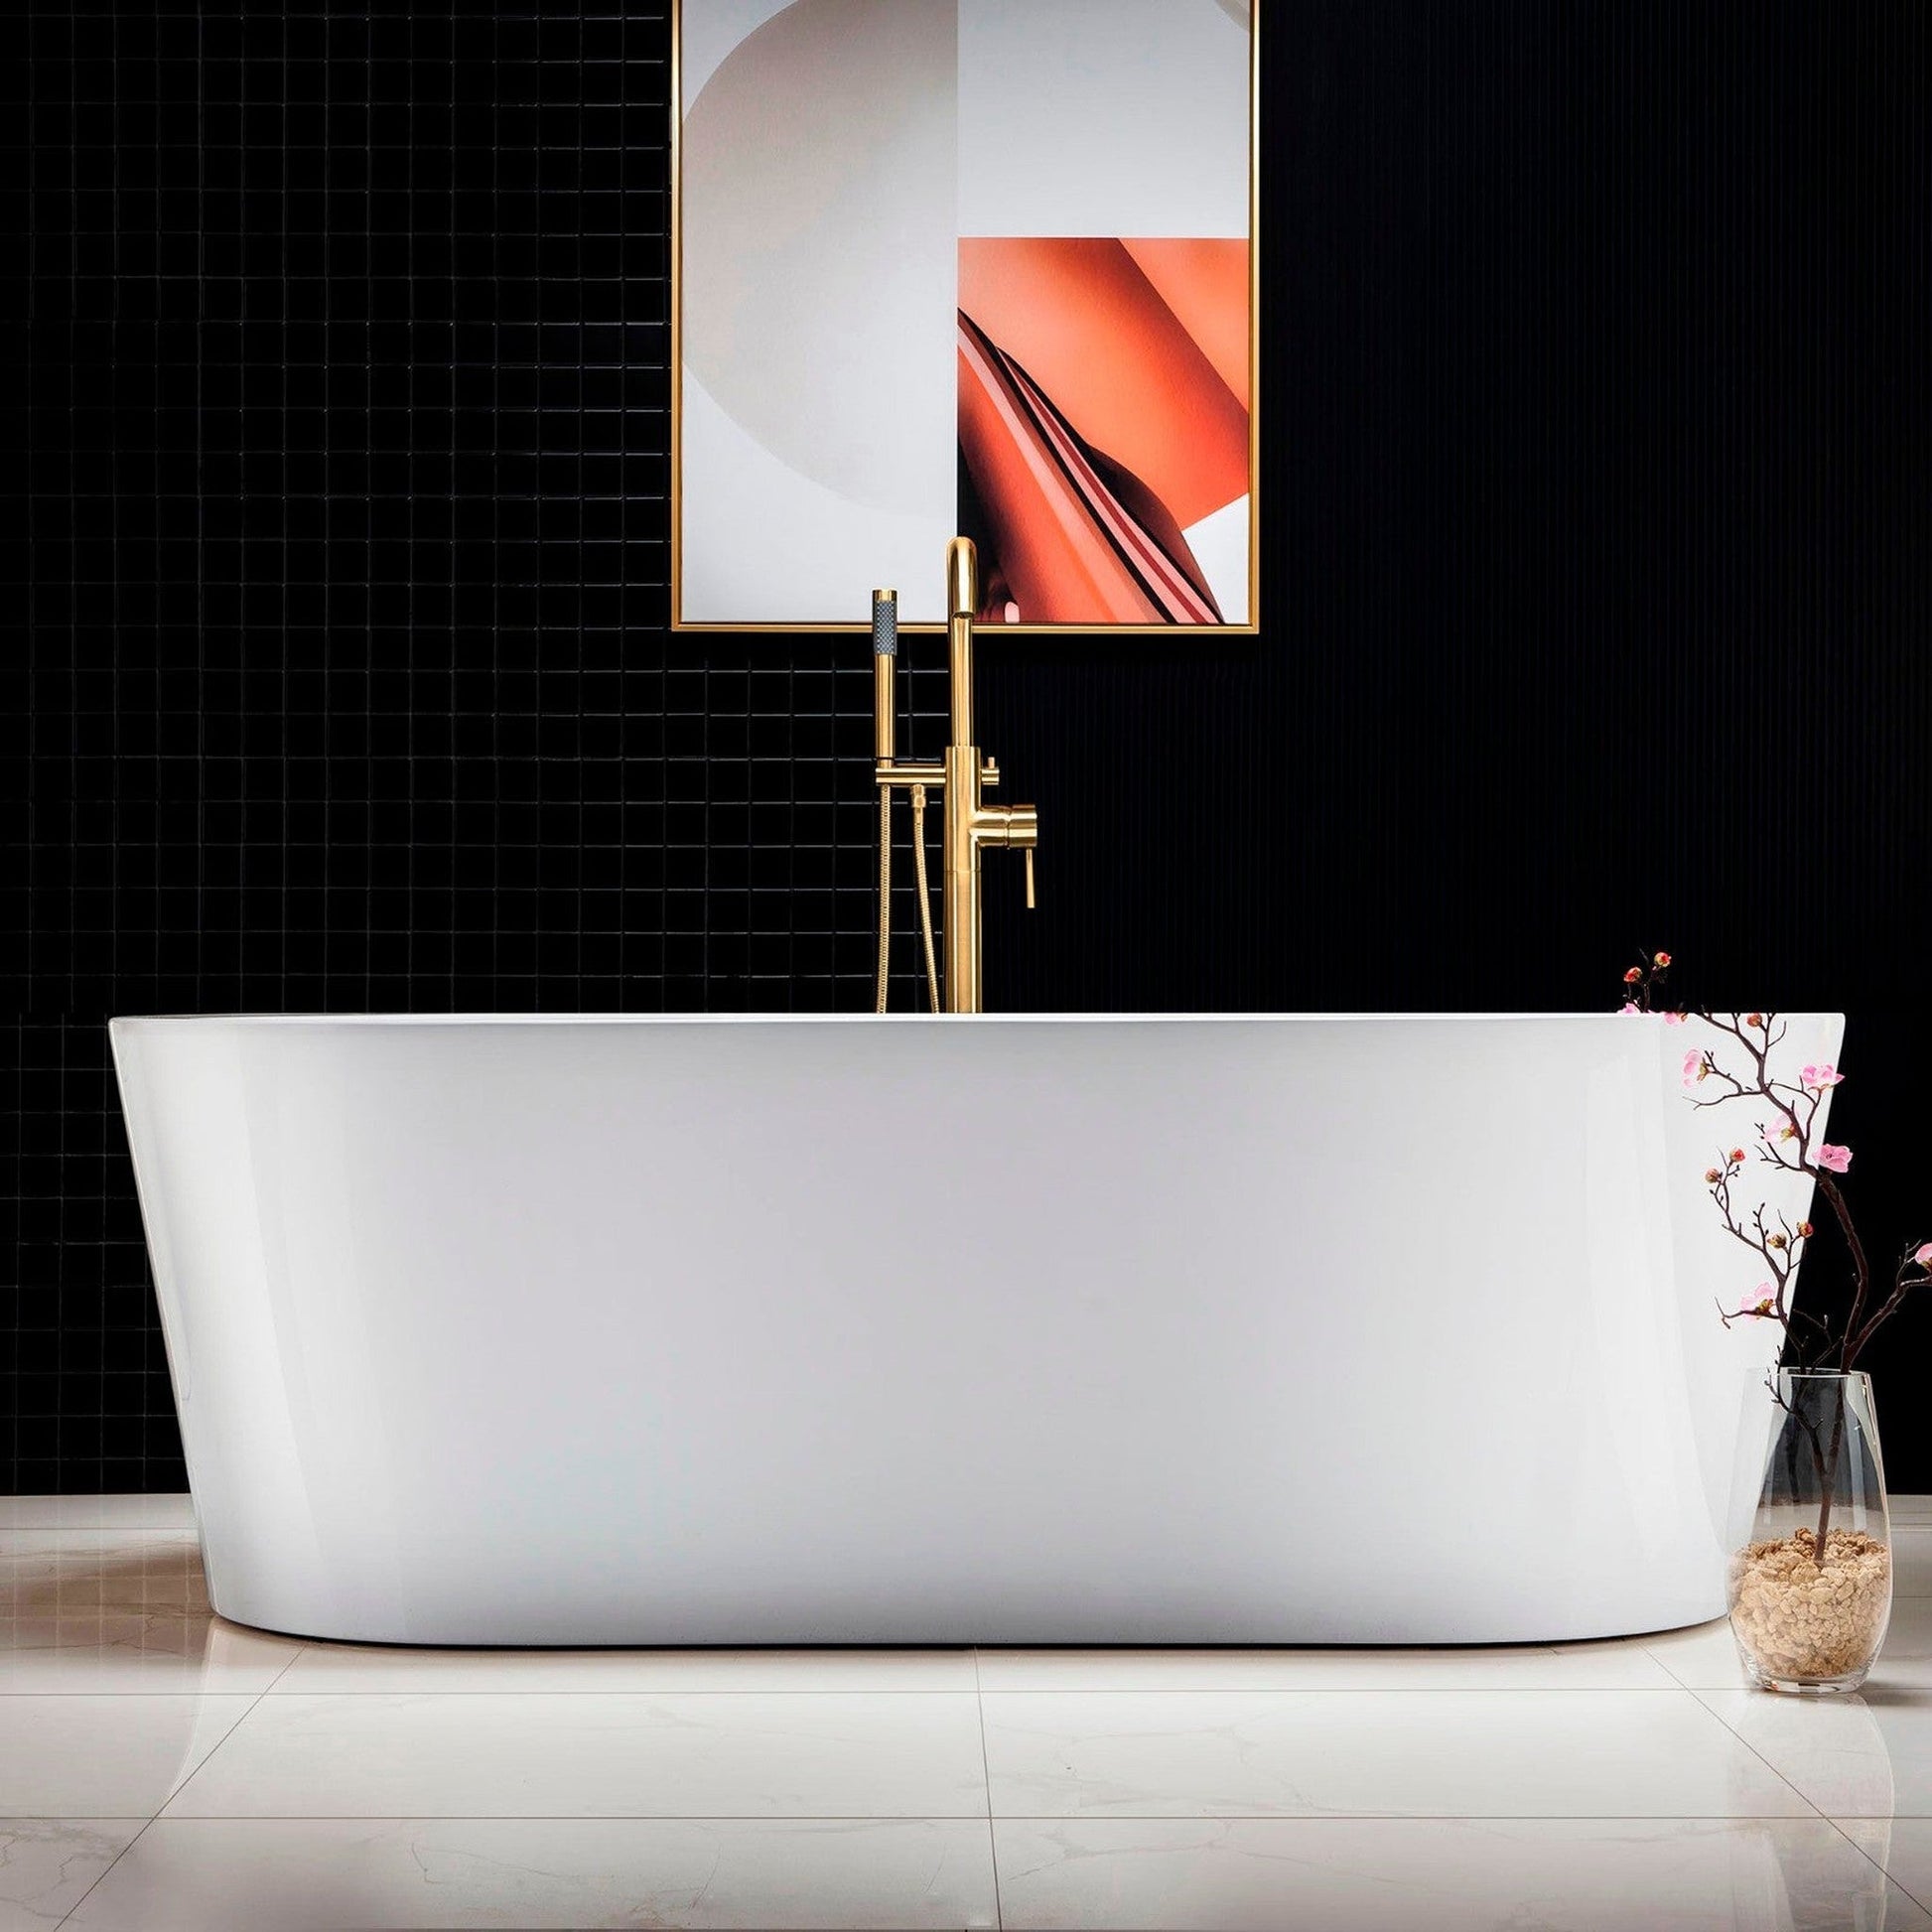 WoodBridge B0002 66" White Acrylic Freestanding Soaking Bathtub With Brushed Gold Drain, Overflow, F0073BGVT Tub Filler and Caddy Tray